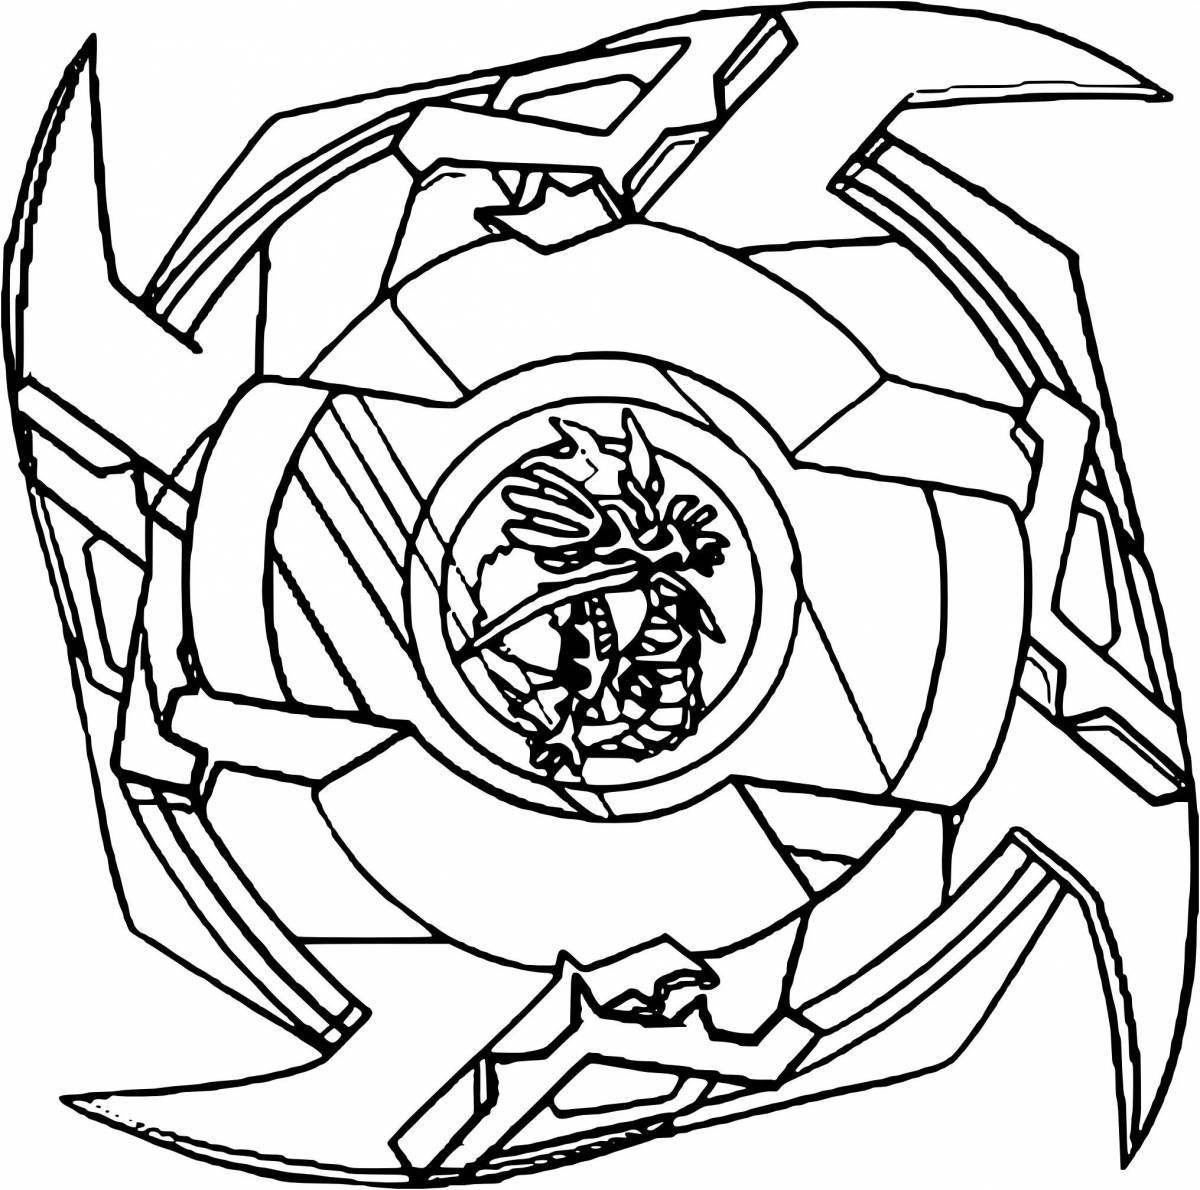 Beyblade burst inviting coloring page